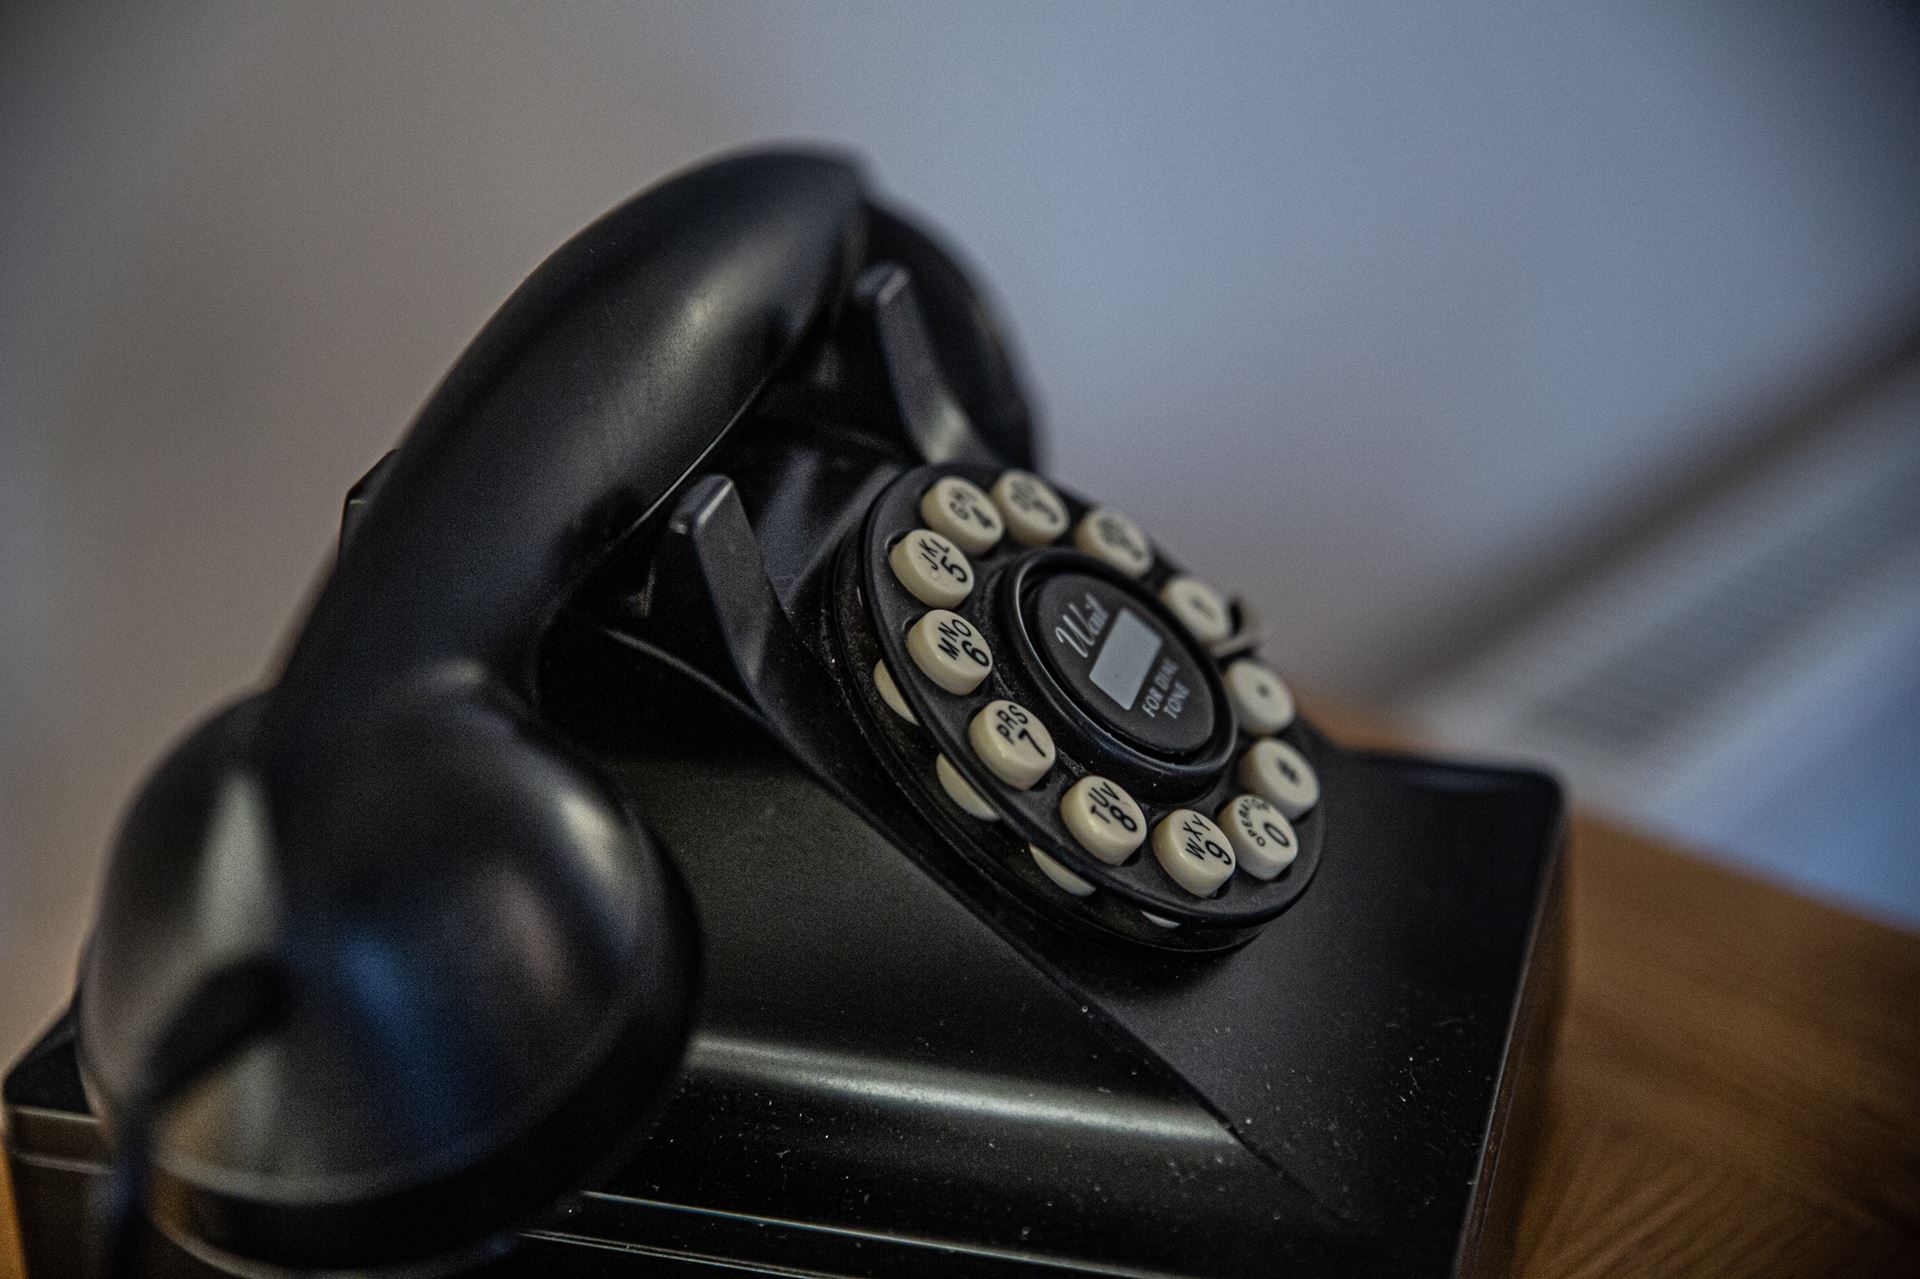 landline telephone with rotary dial